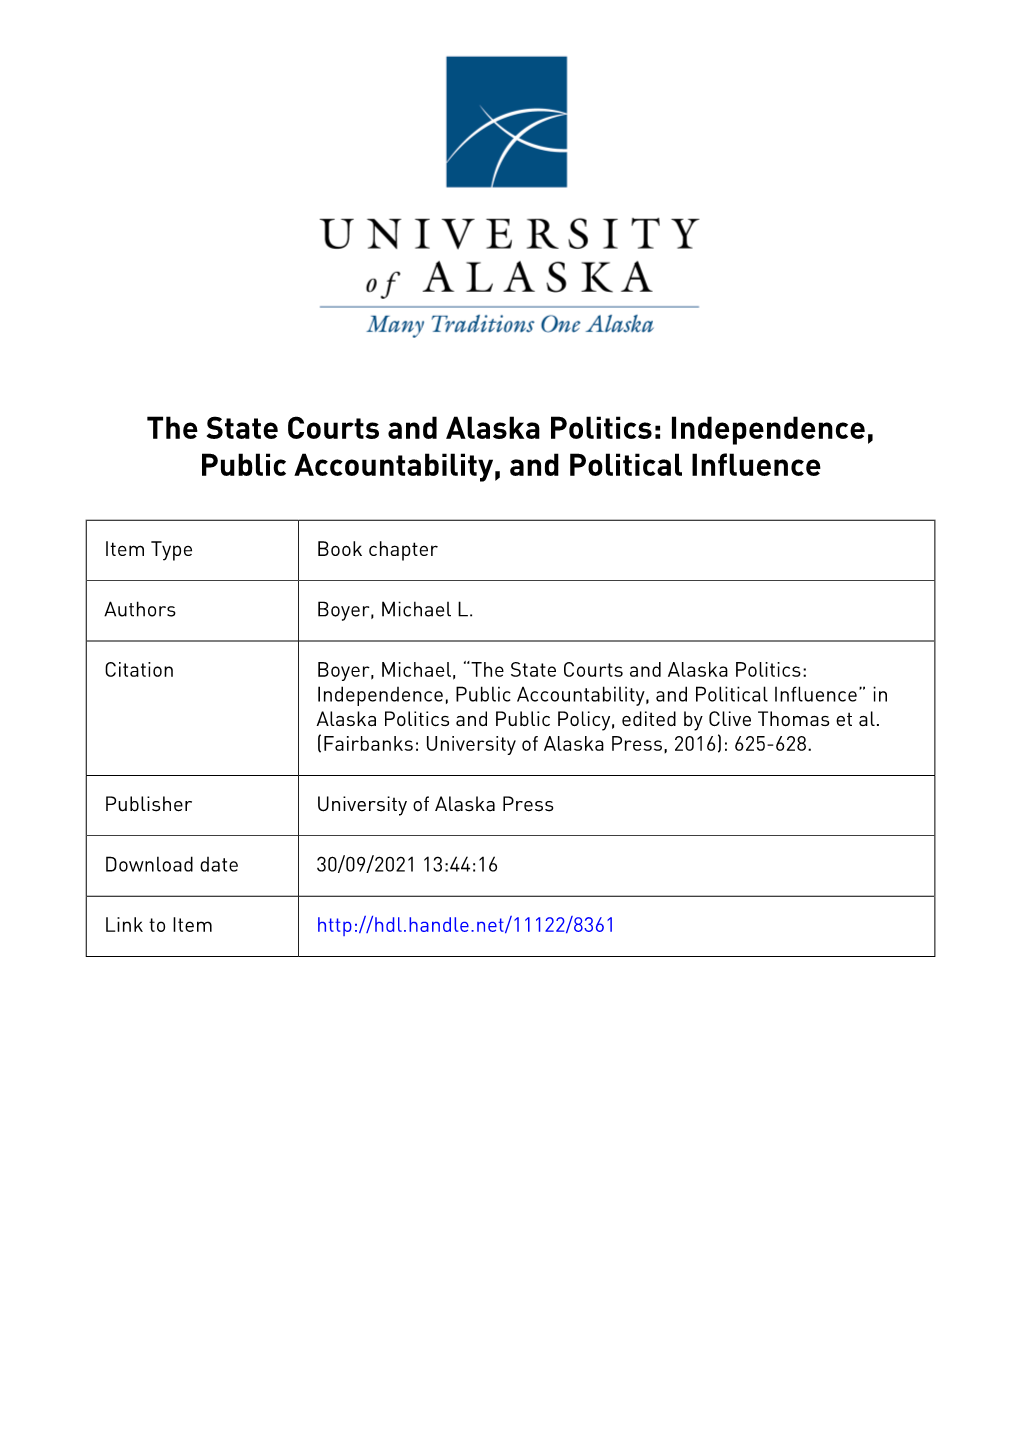 The State Courts and Alaska Politics: Independence, Public Accountability, and Political Influence